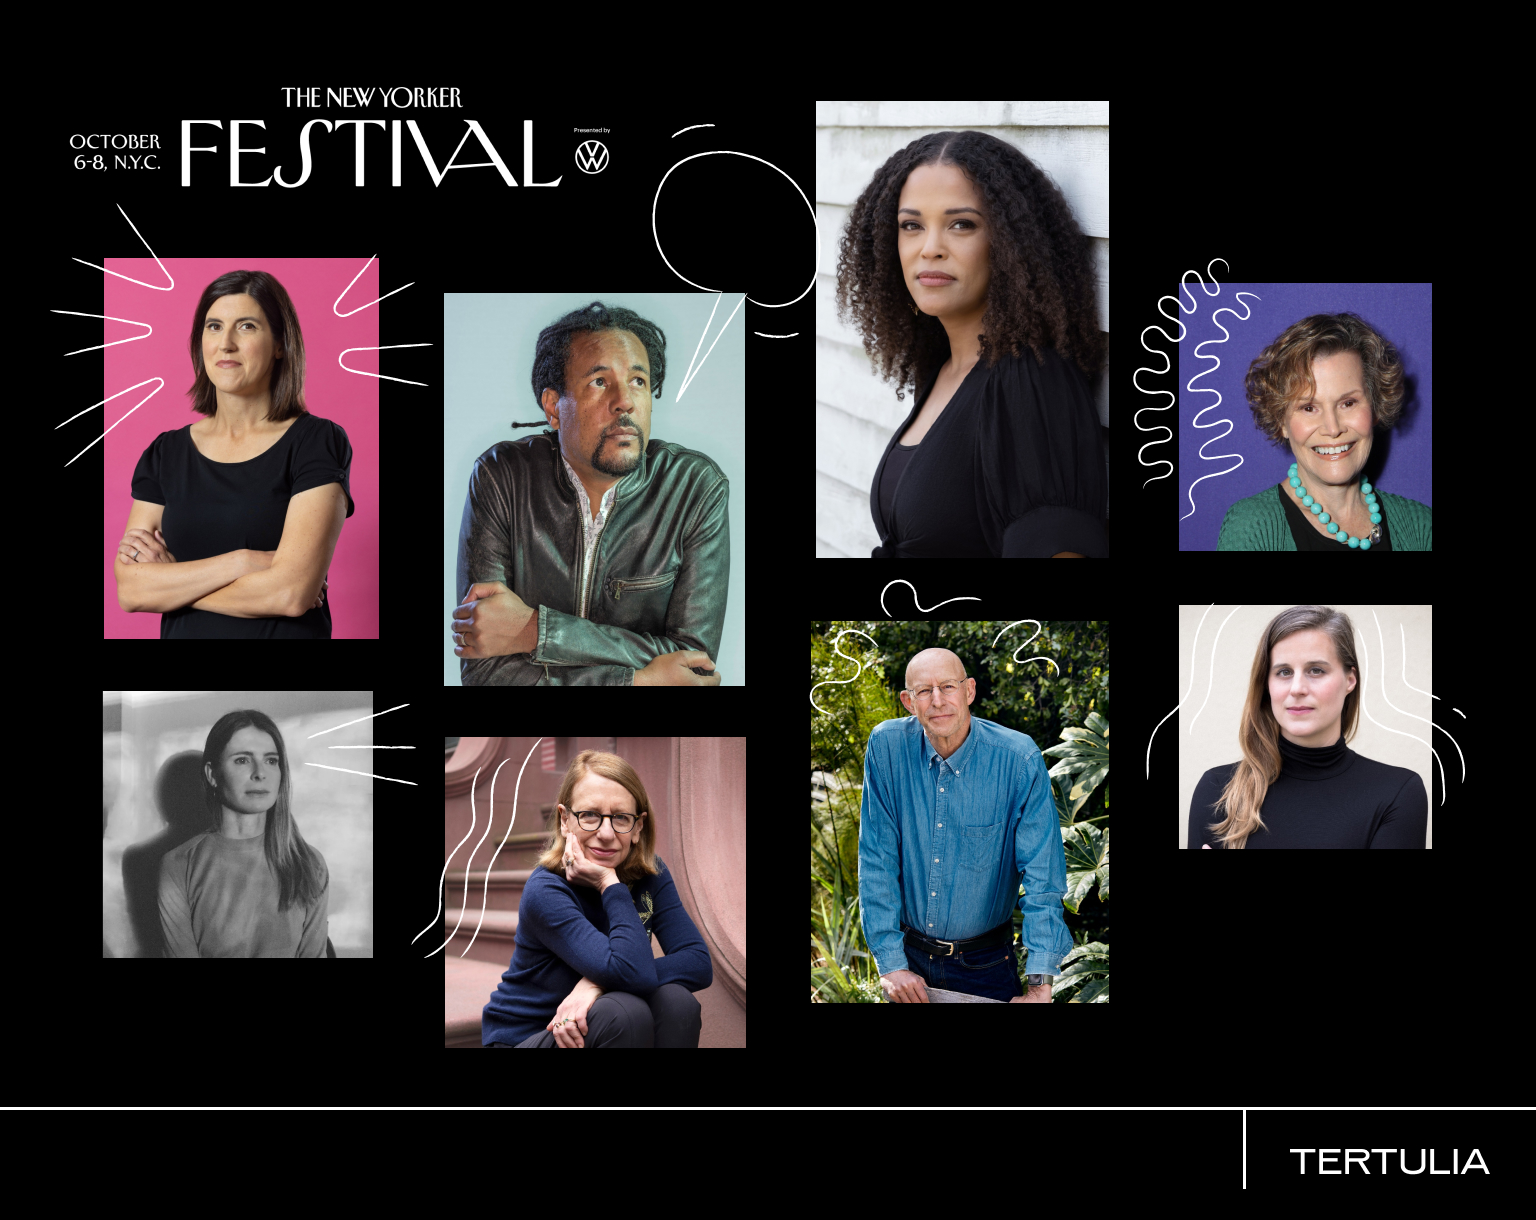 Article image for: You’re Invited to The New Yorker Festival